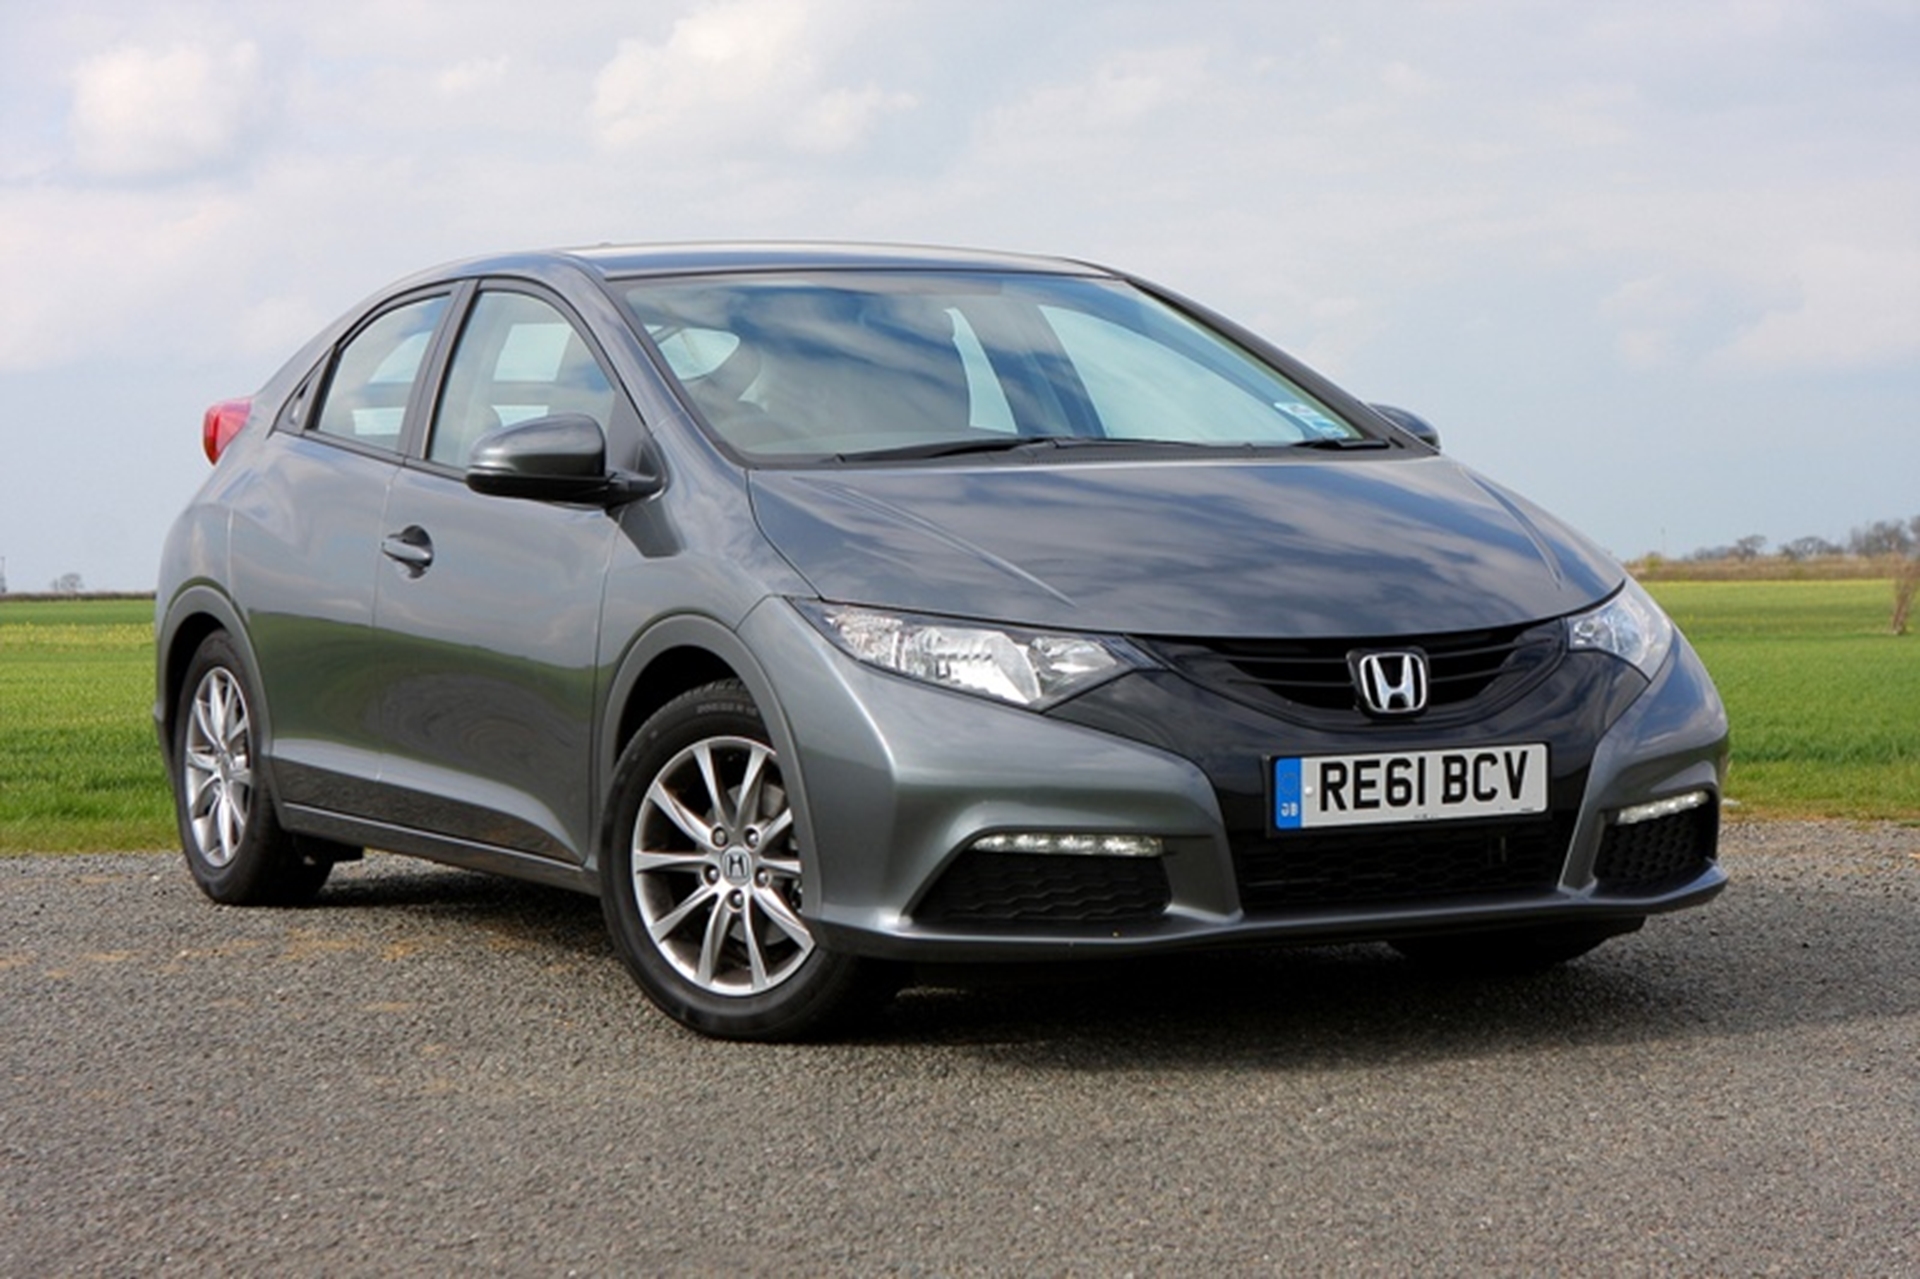 IT IS OFFICIAL – NEW HONDA CIVIC IS THE BEST VALUE CAR ON THE ROAD